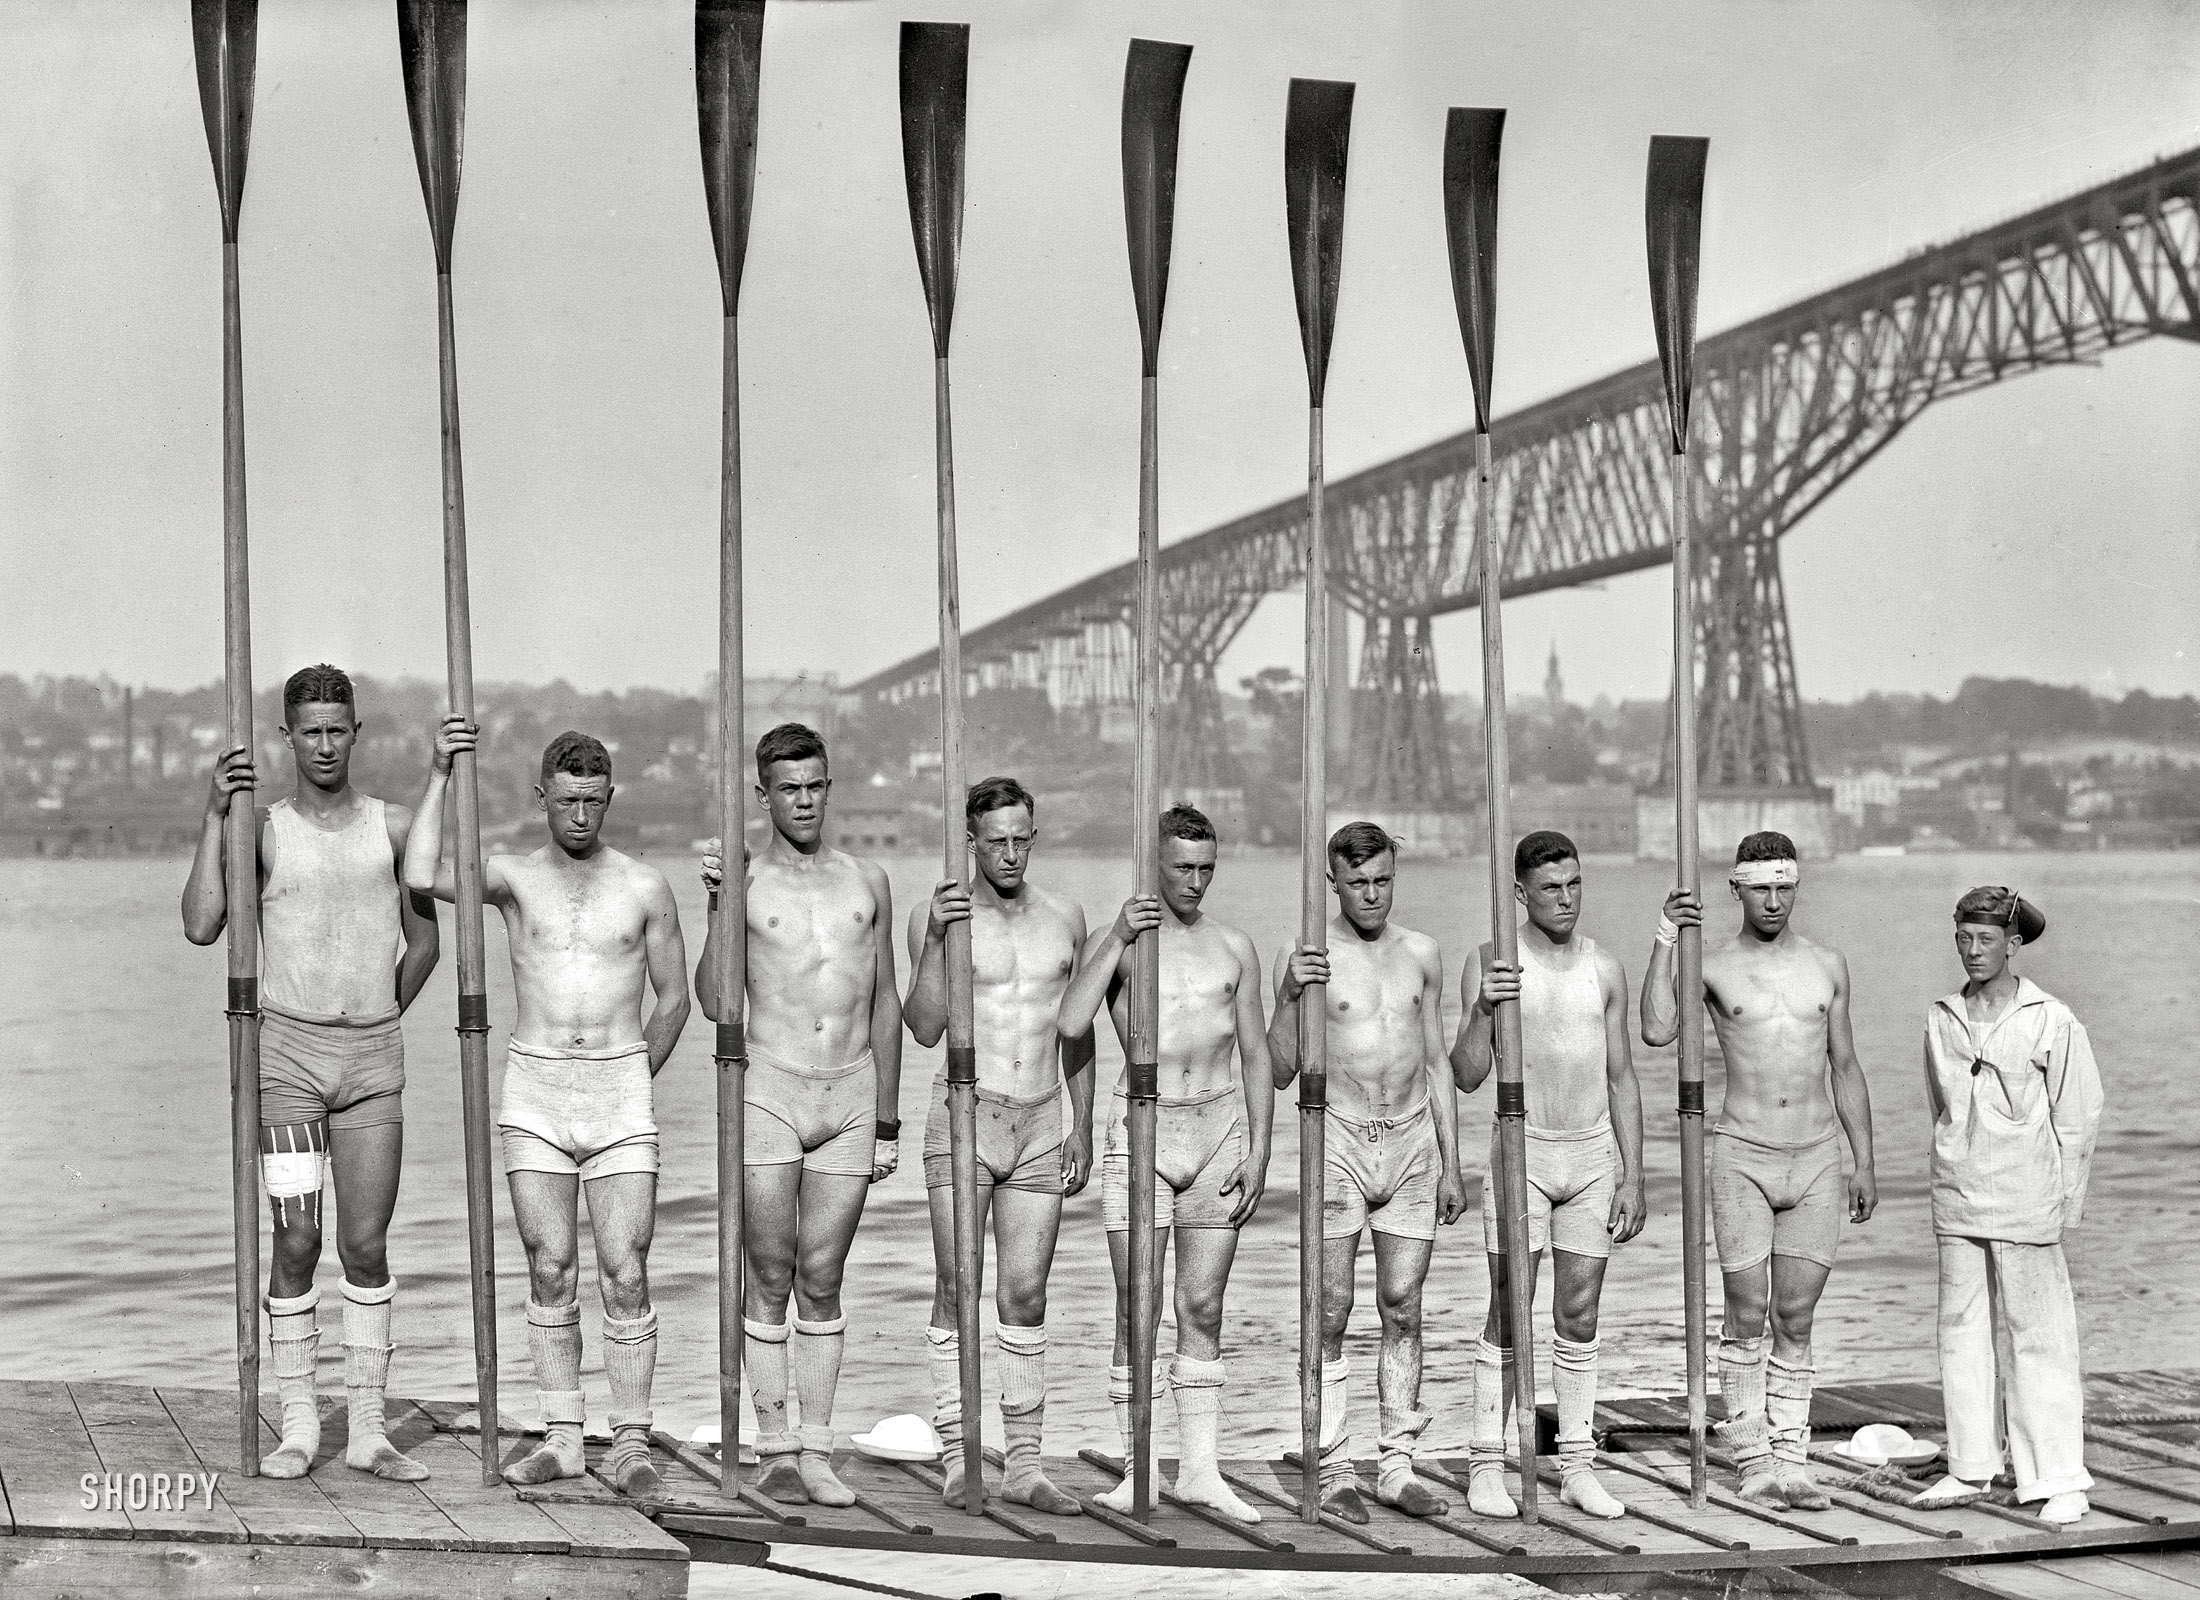 June 1914. Poughkeepsie, New York. "Wisconsin freshmen on Hudson River." More rowers from the heyday of the Poughkeepsie Regatta. View full size.